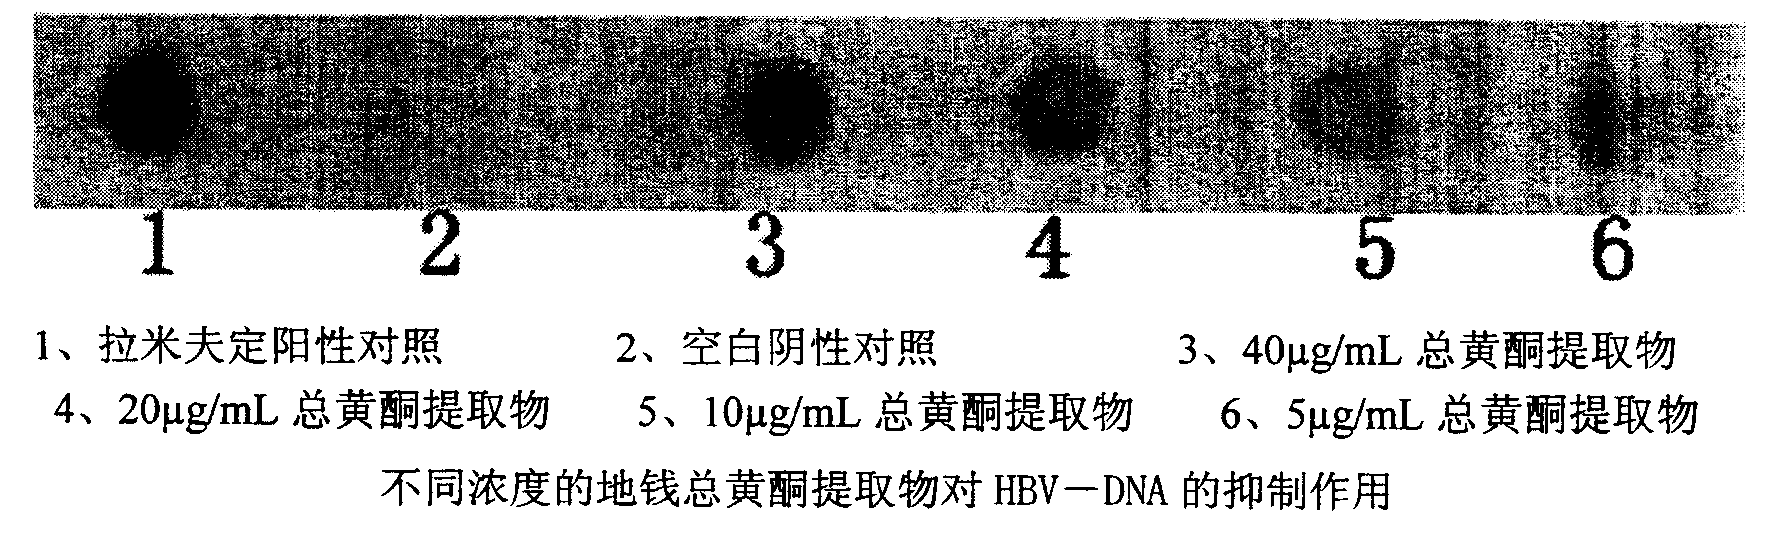 Technique for preparing liverwort extract and application of it in preparing medicine for treating liver cancer and hepatitis B